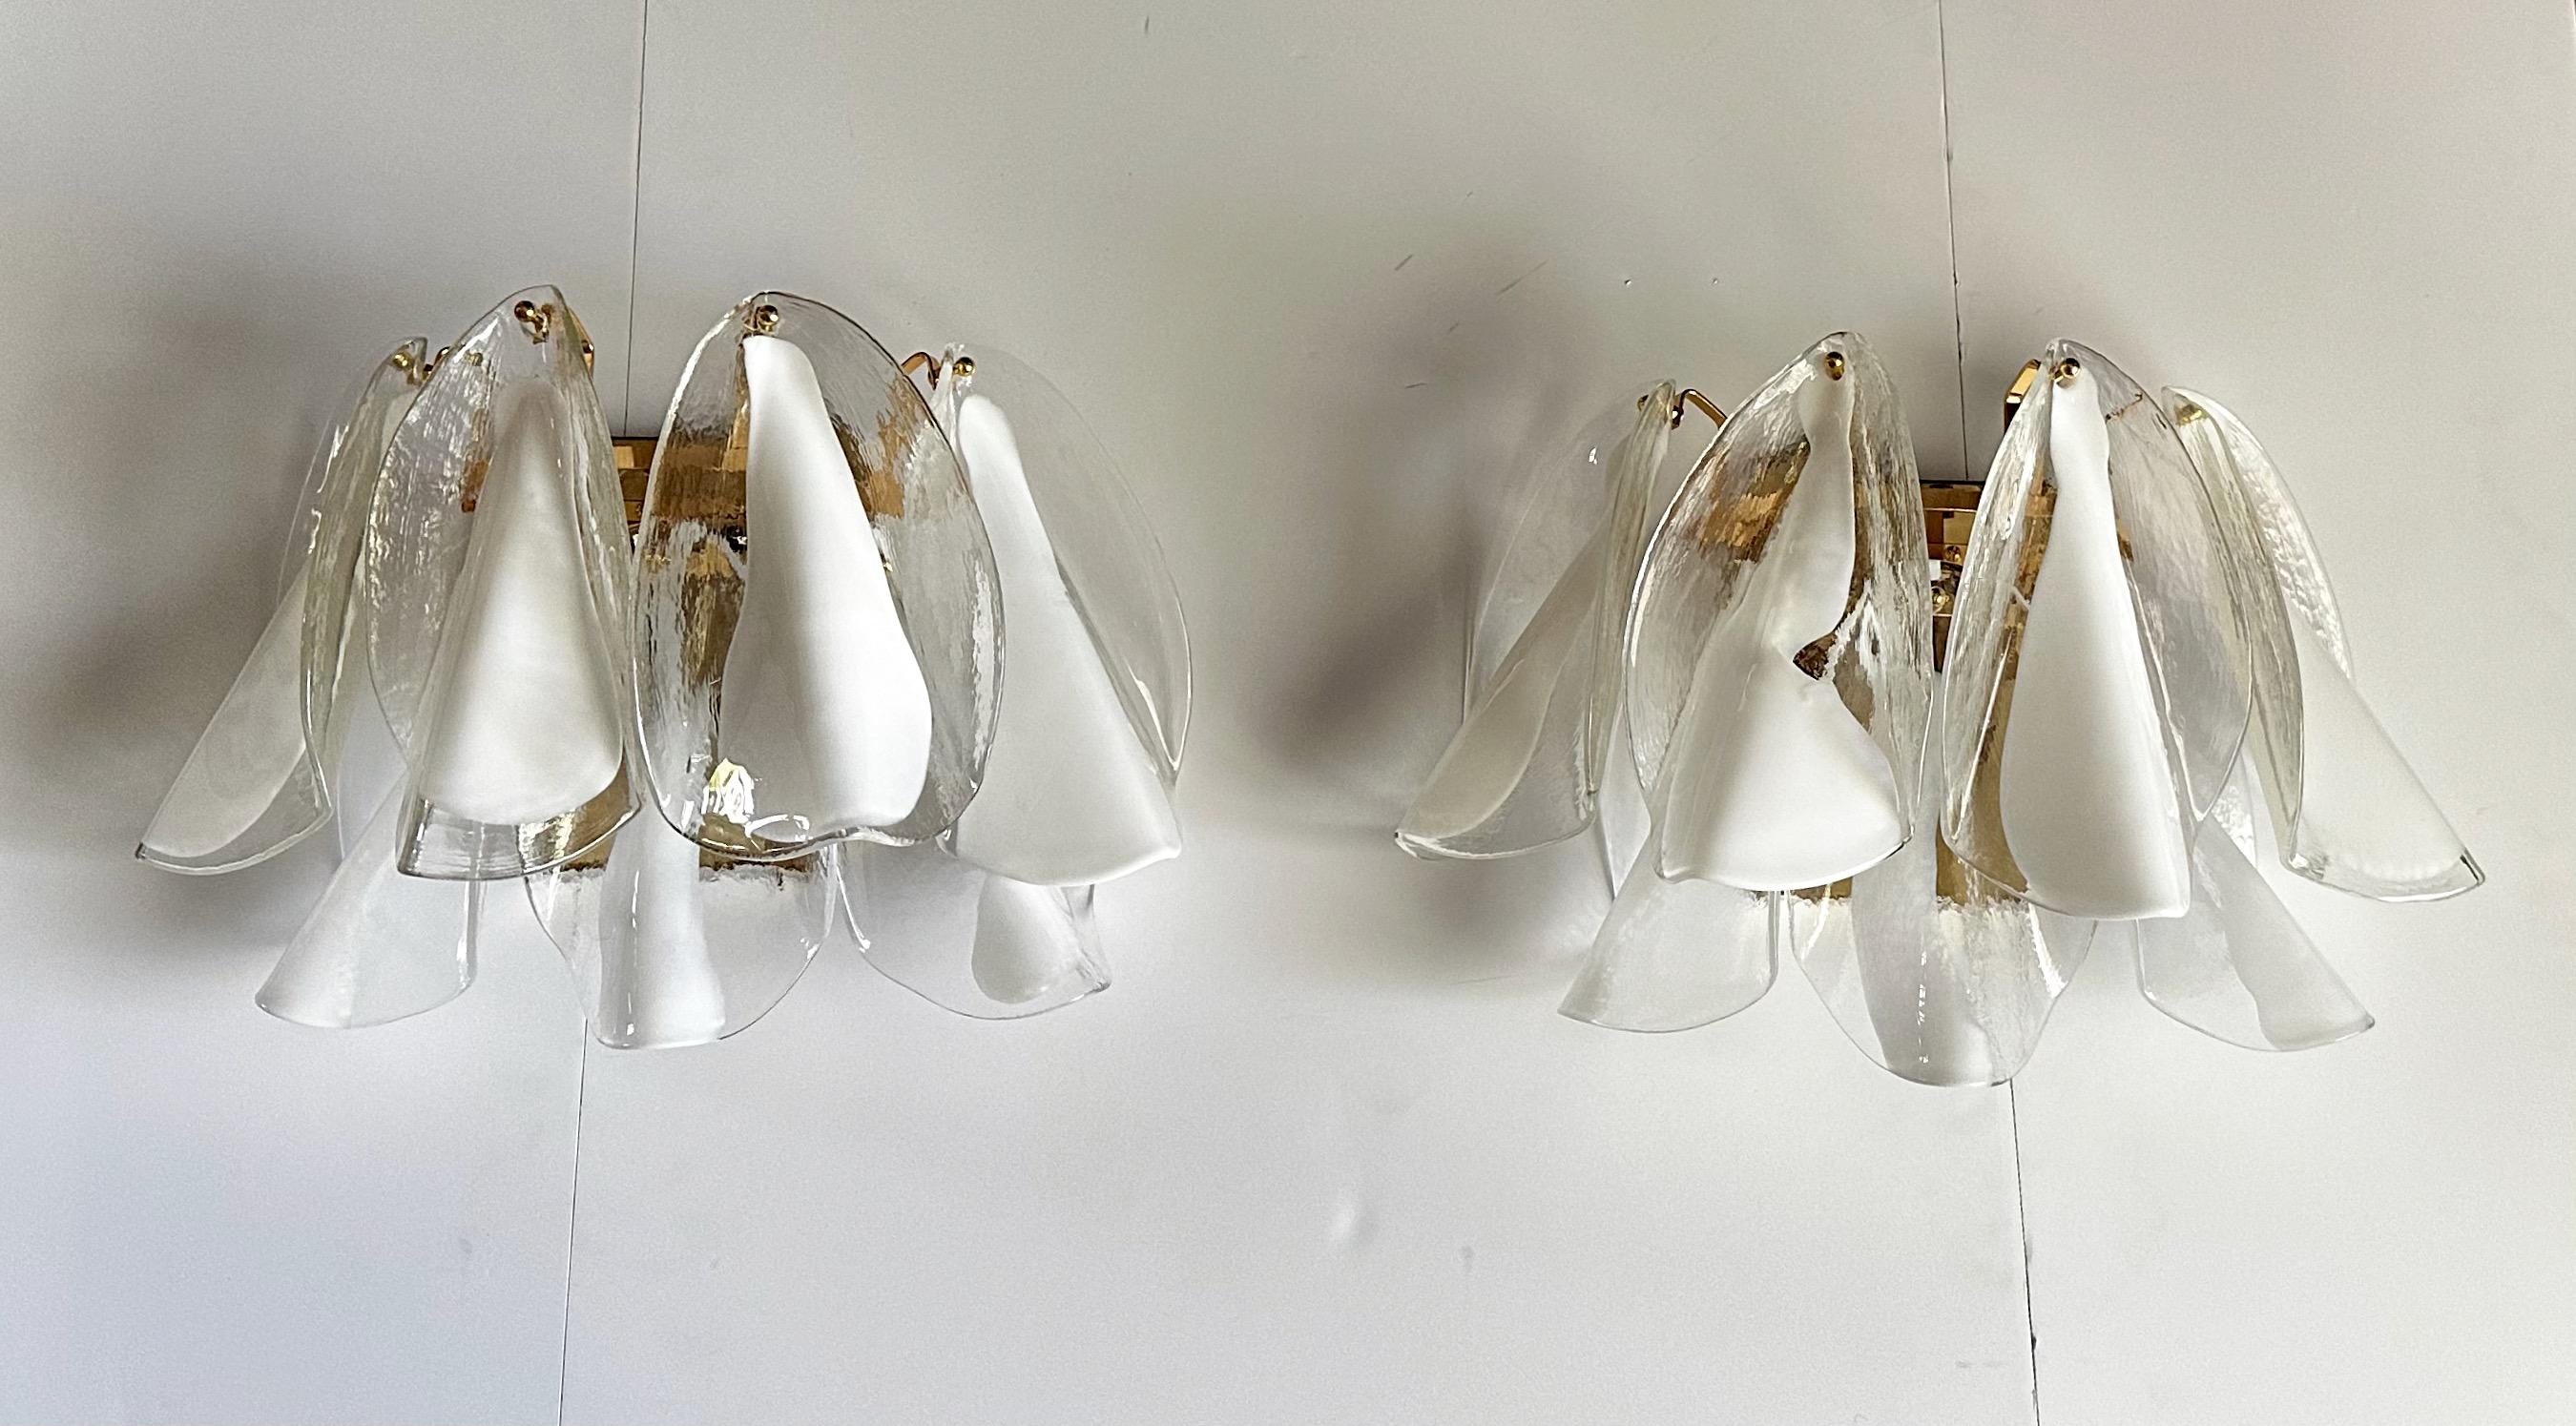 Pair of Murano Mazzega clear and white glass peddle shape sconces supported on brass finish backplates. Each sconce has 7 total glass leaves or peddles, top 4 are slightly larger than the lower 3 peddles. Each sconce uses 2 candelabra size bulb.